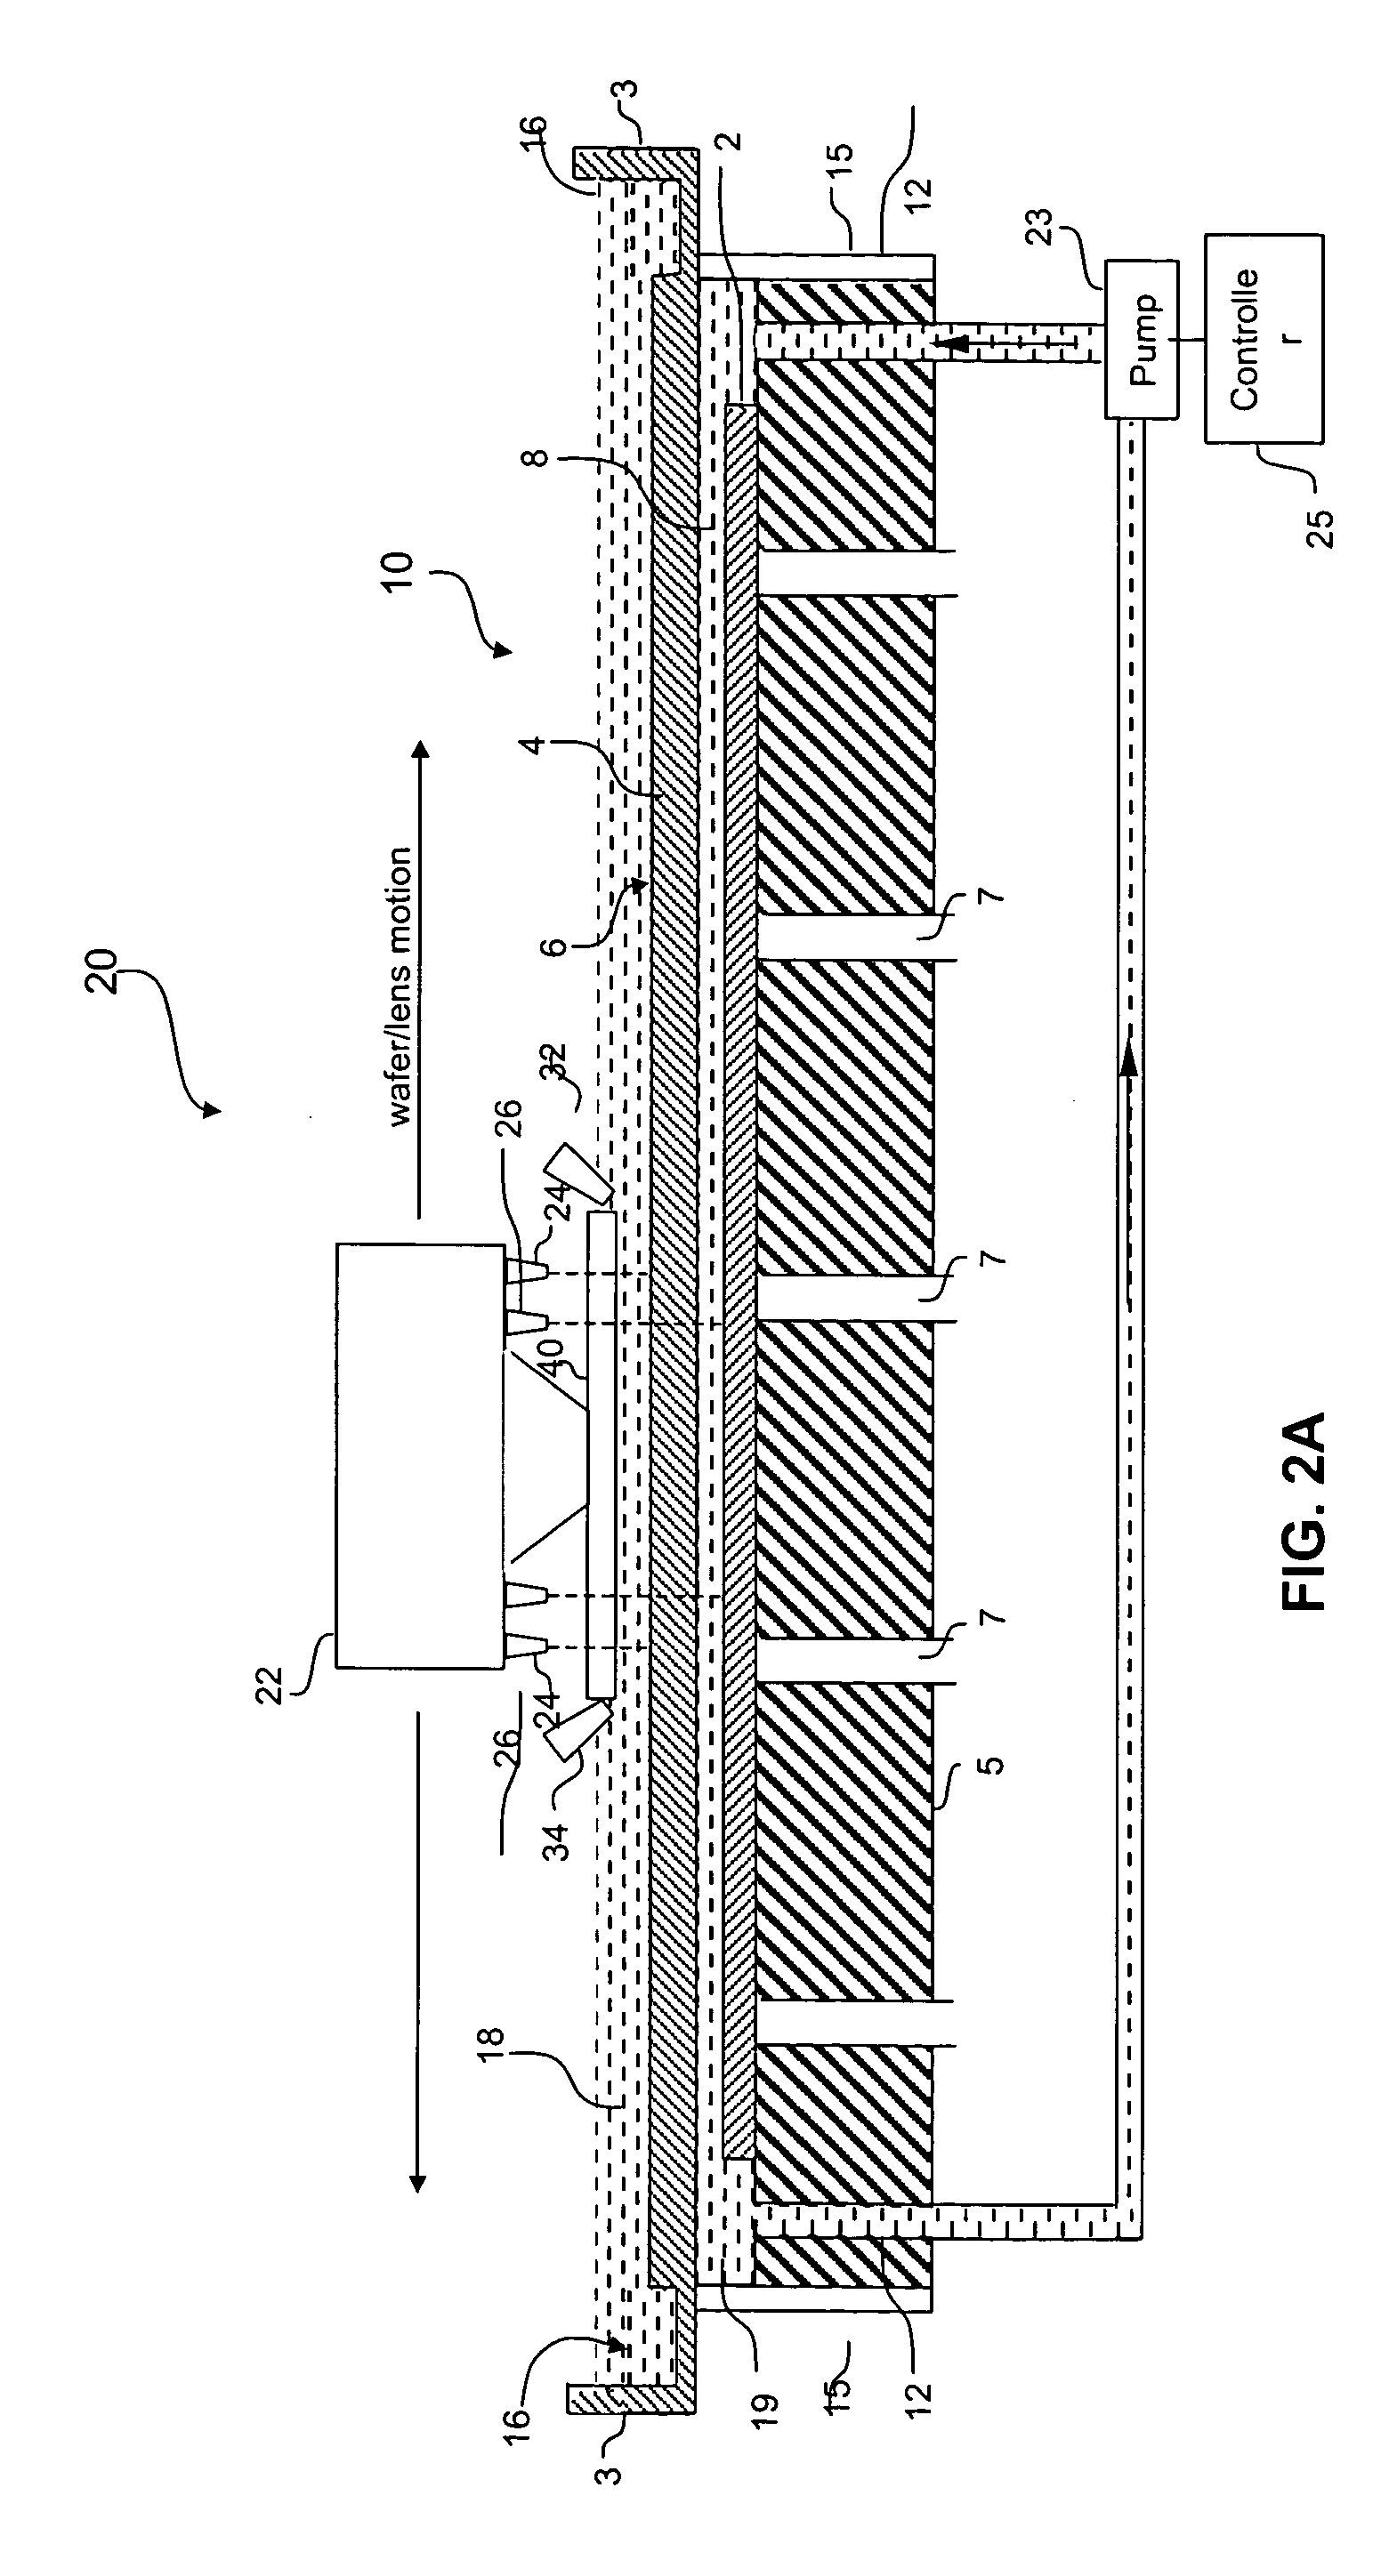 Wafer cell for immersion lithography